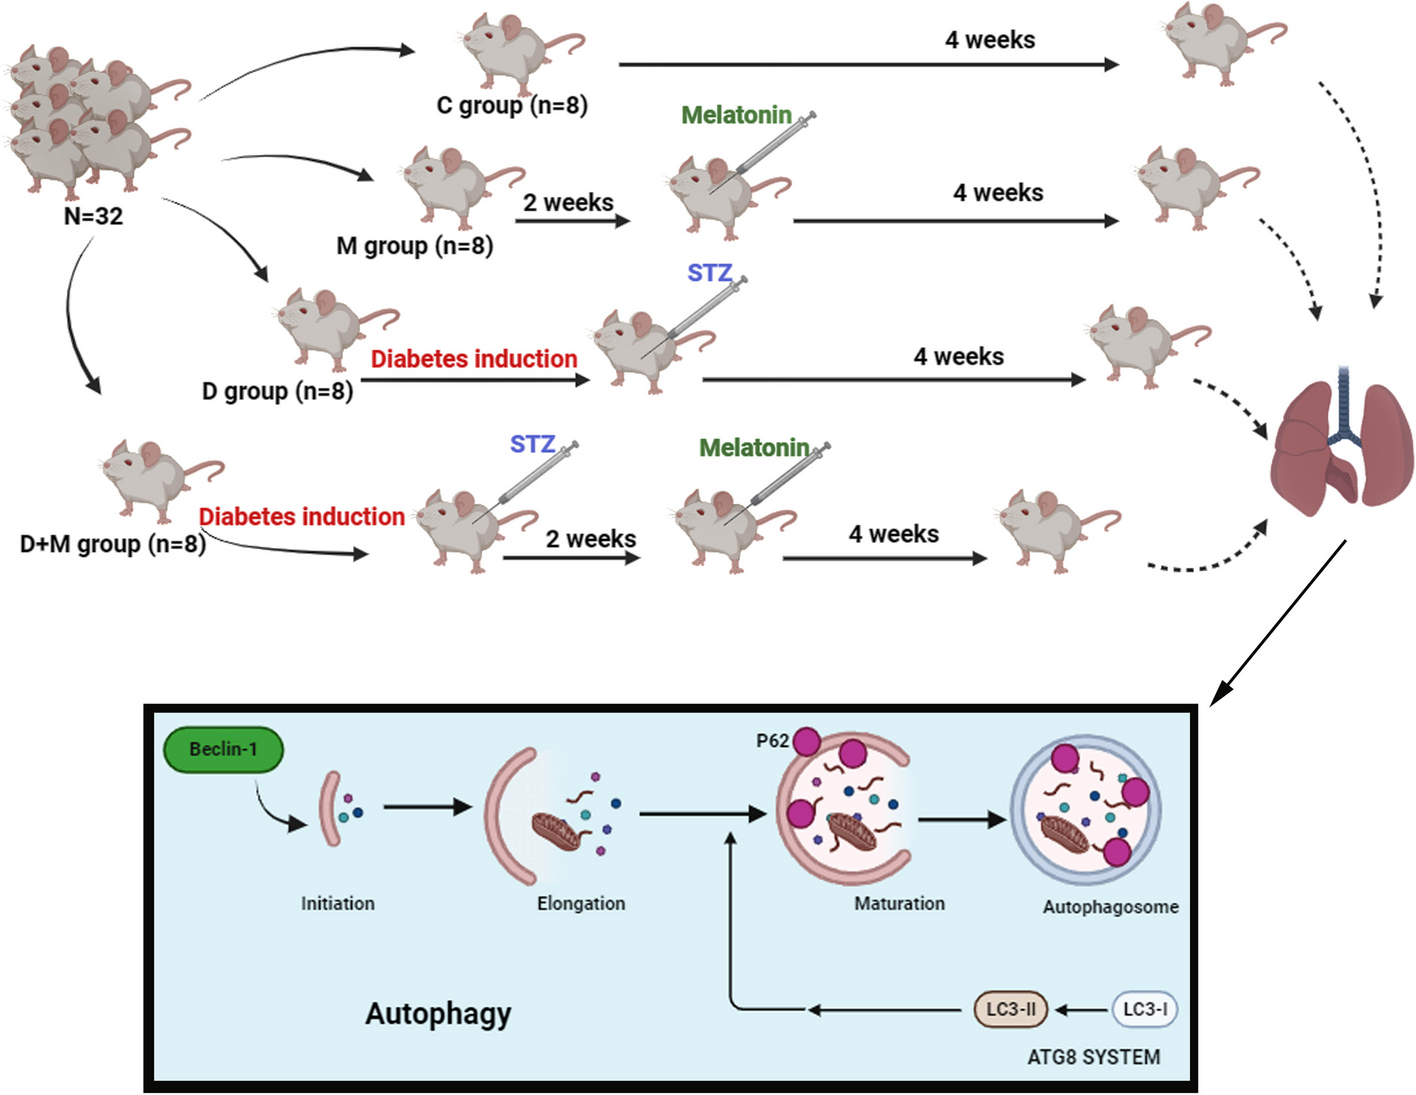 Melatonin reduces lung injury in type 1 diabetic mice by the modulation of autophagy